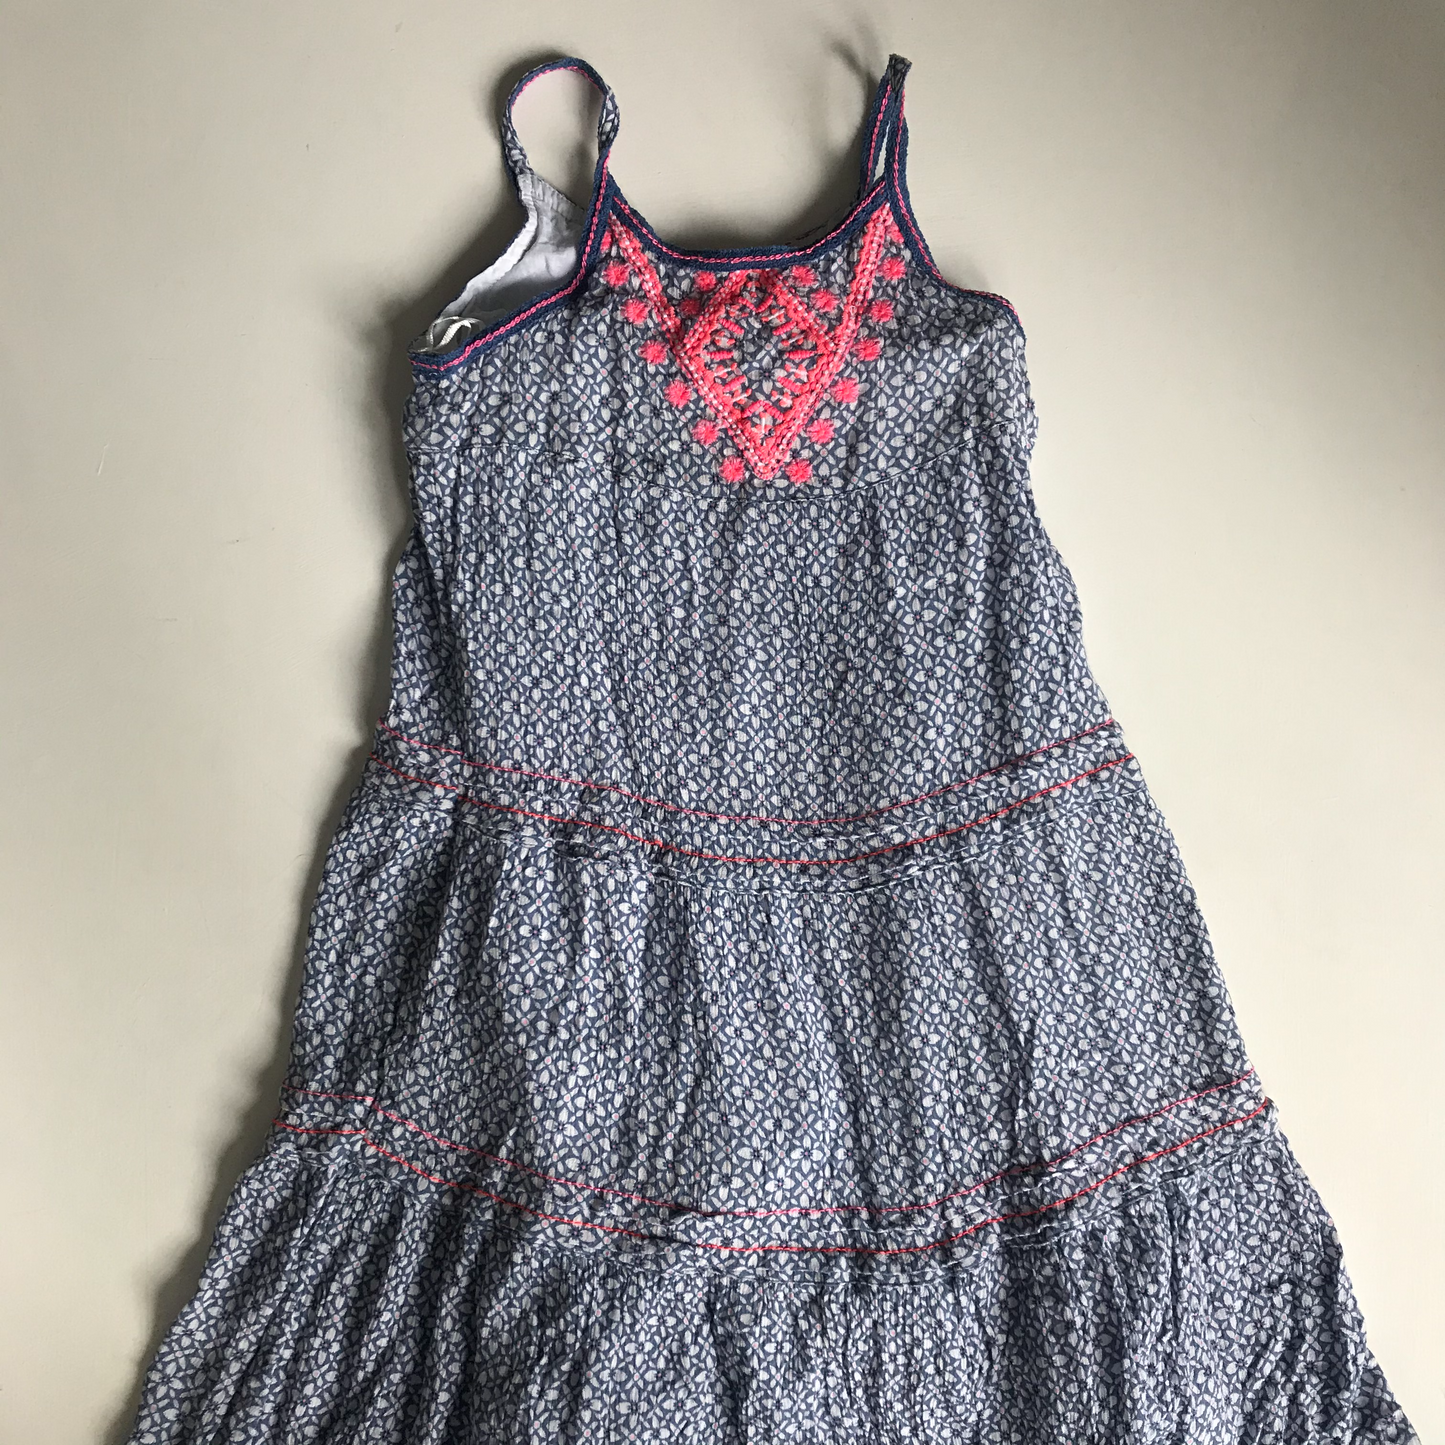 Dress - Blue with Embroidery - Age 5